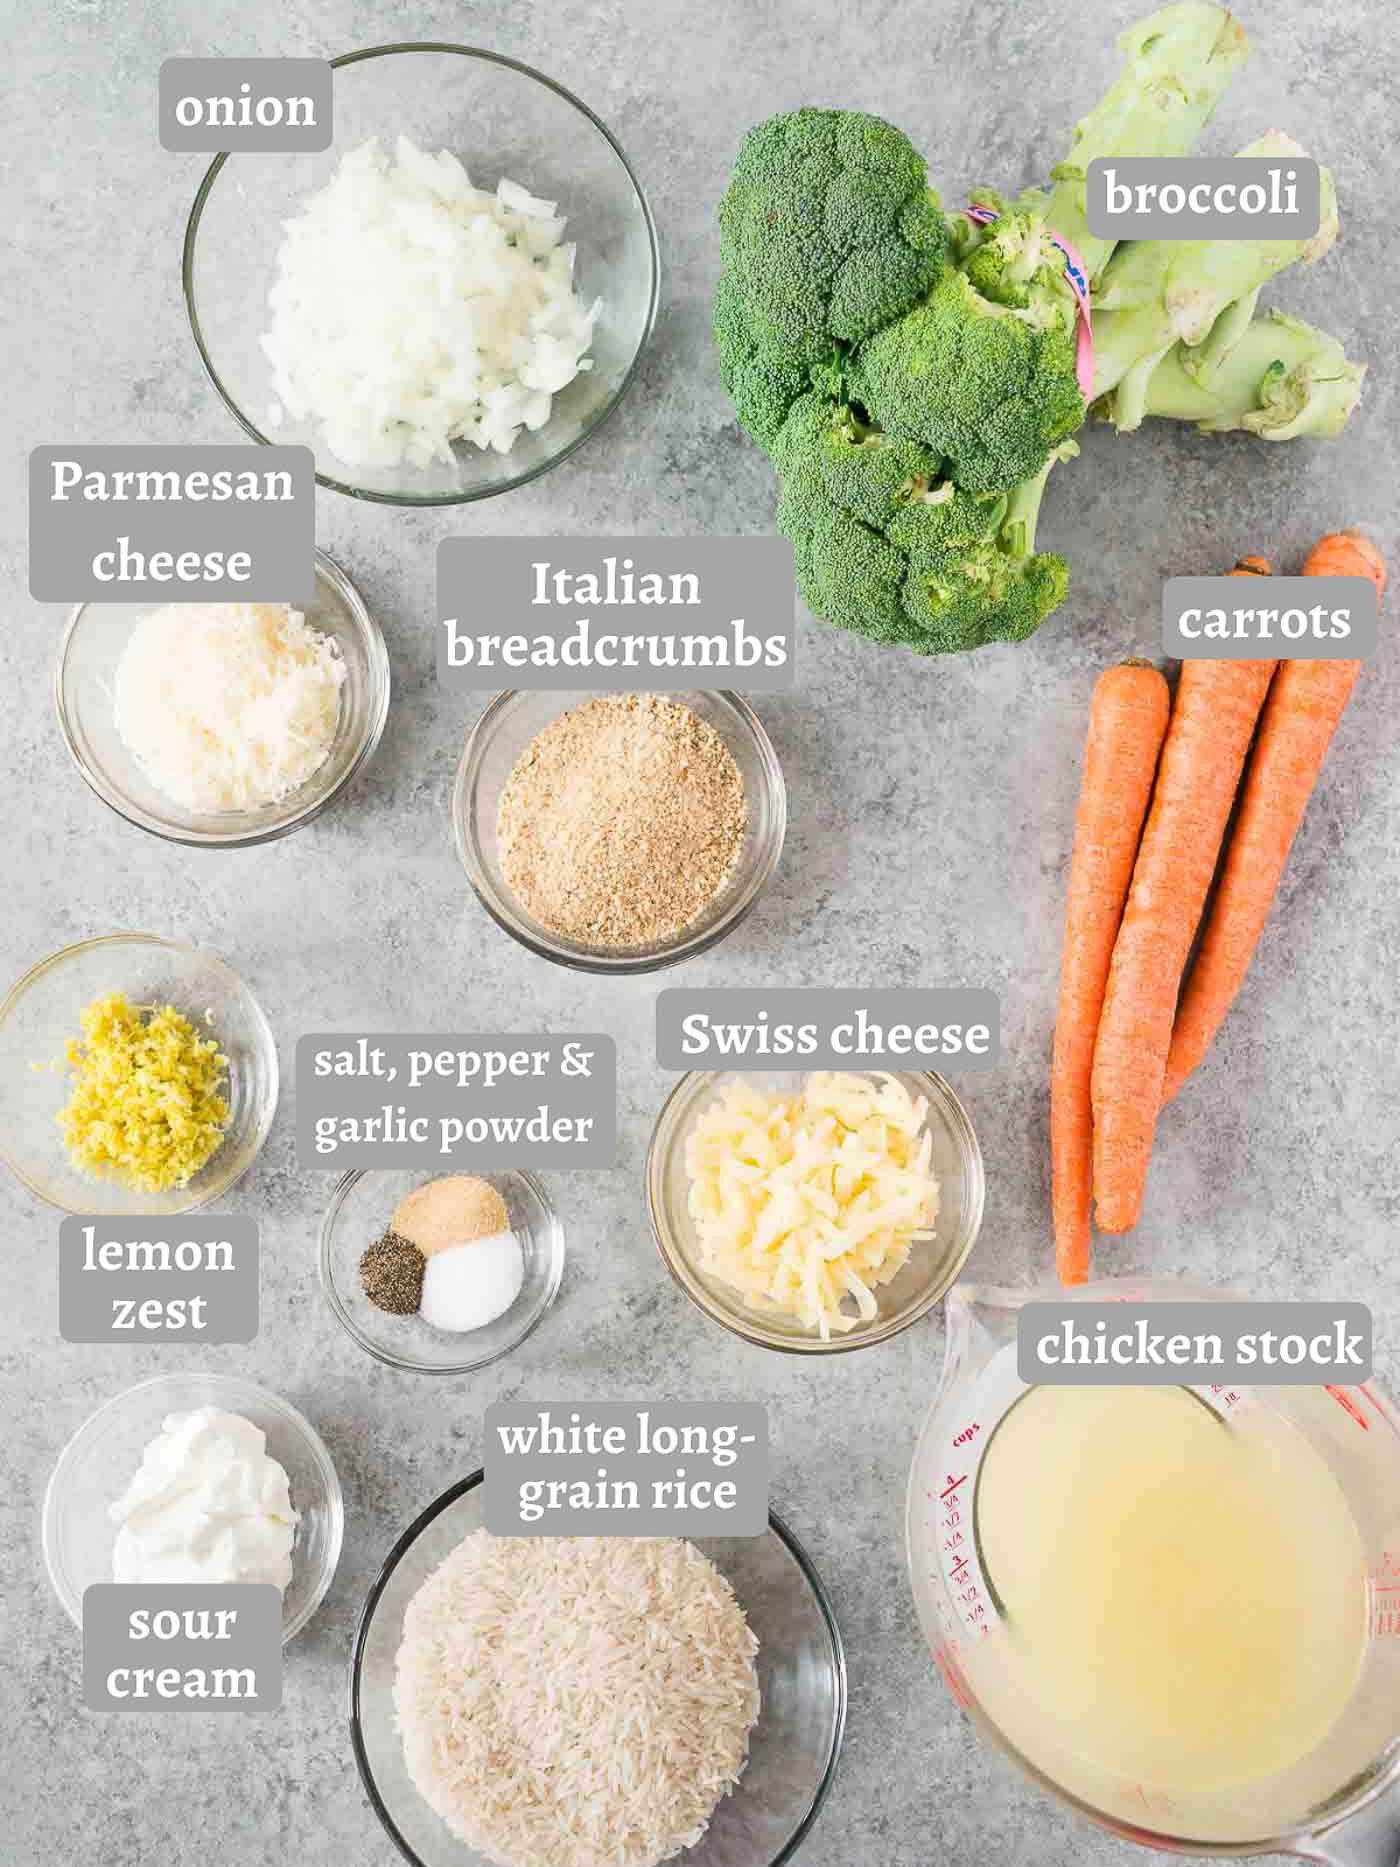 ingredients for broccoli and rice casserole